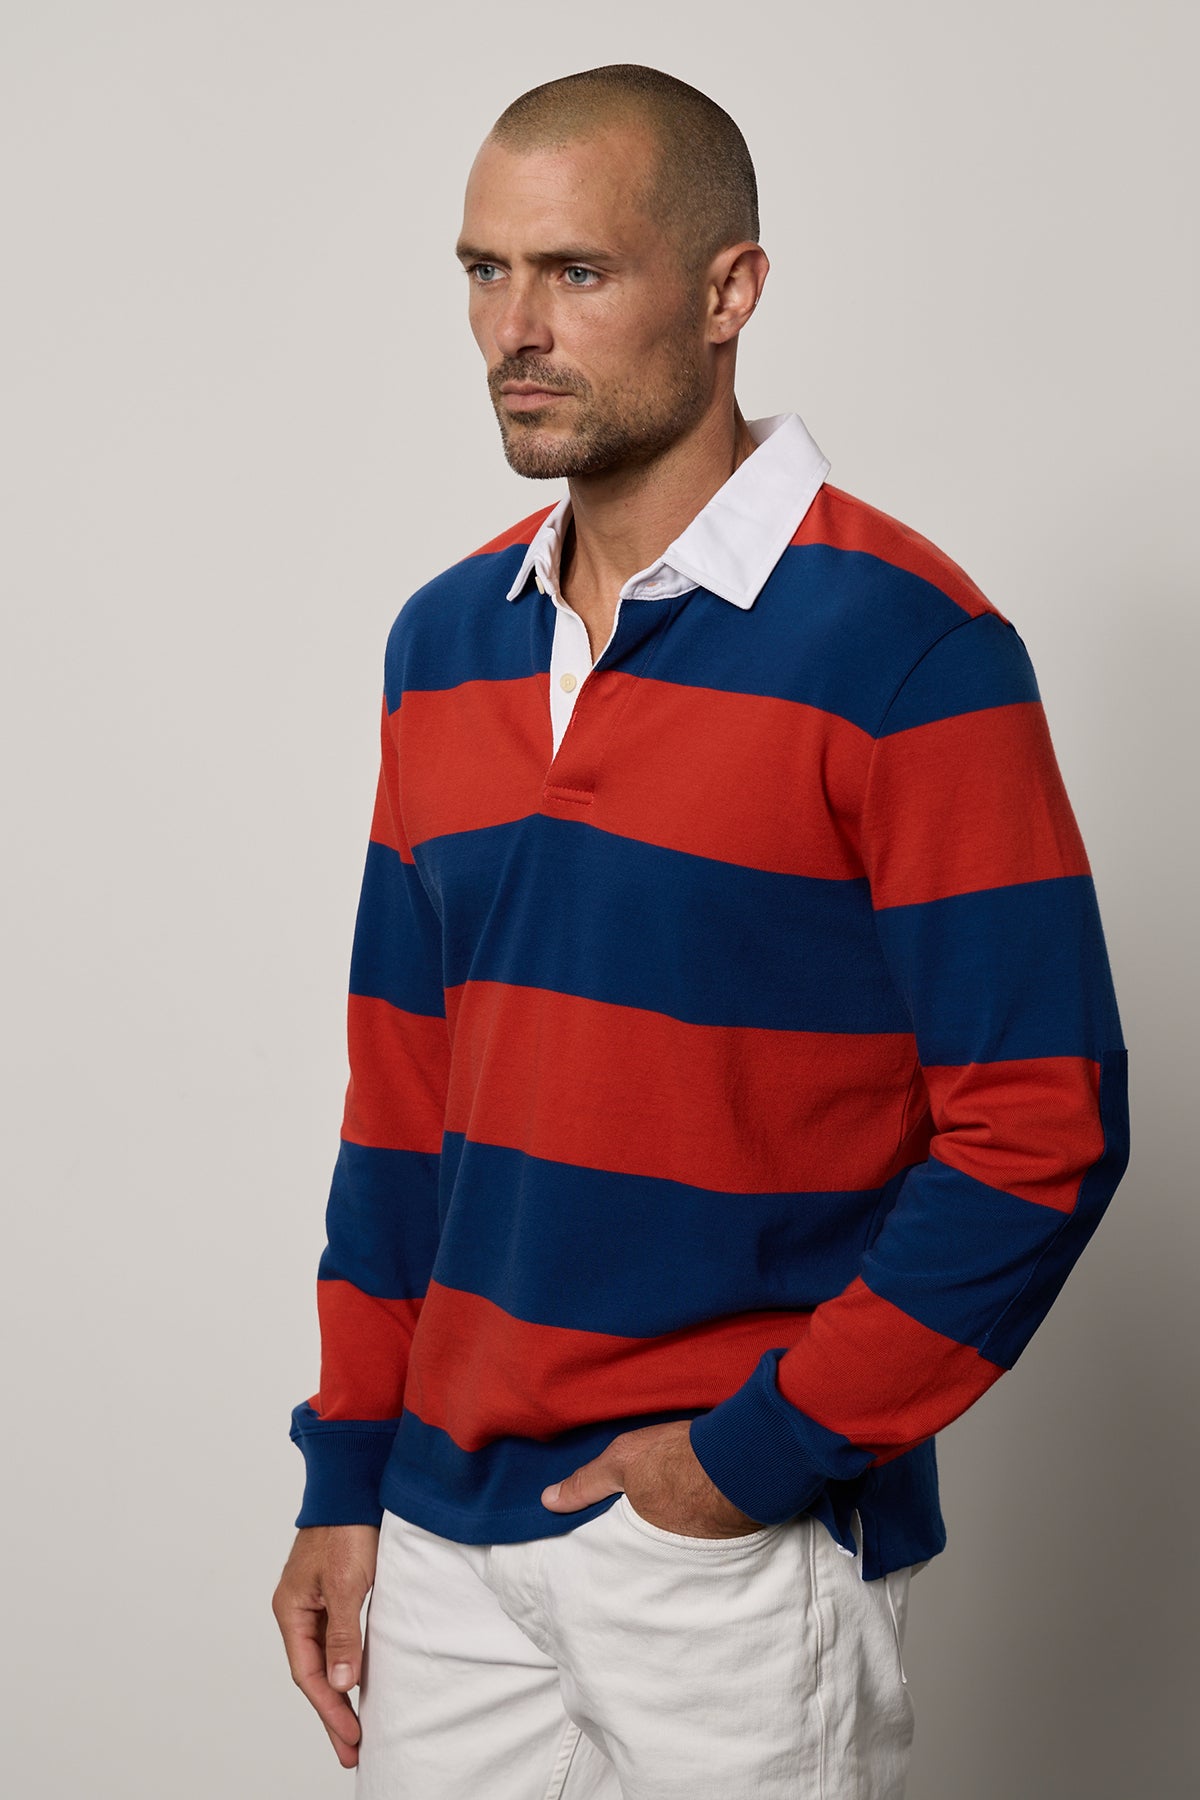 Pierre Rugby Stripe long sleeve polol with broad blue and red stripes and white collar with white denim front-25994790502593